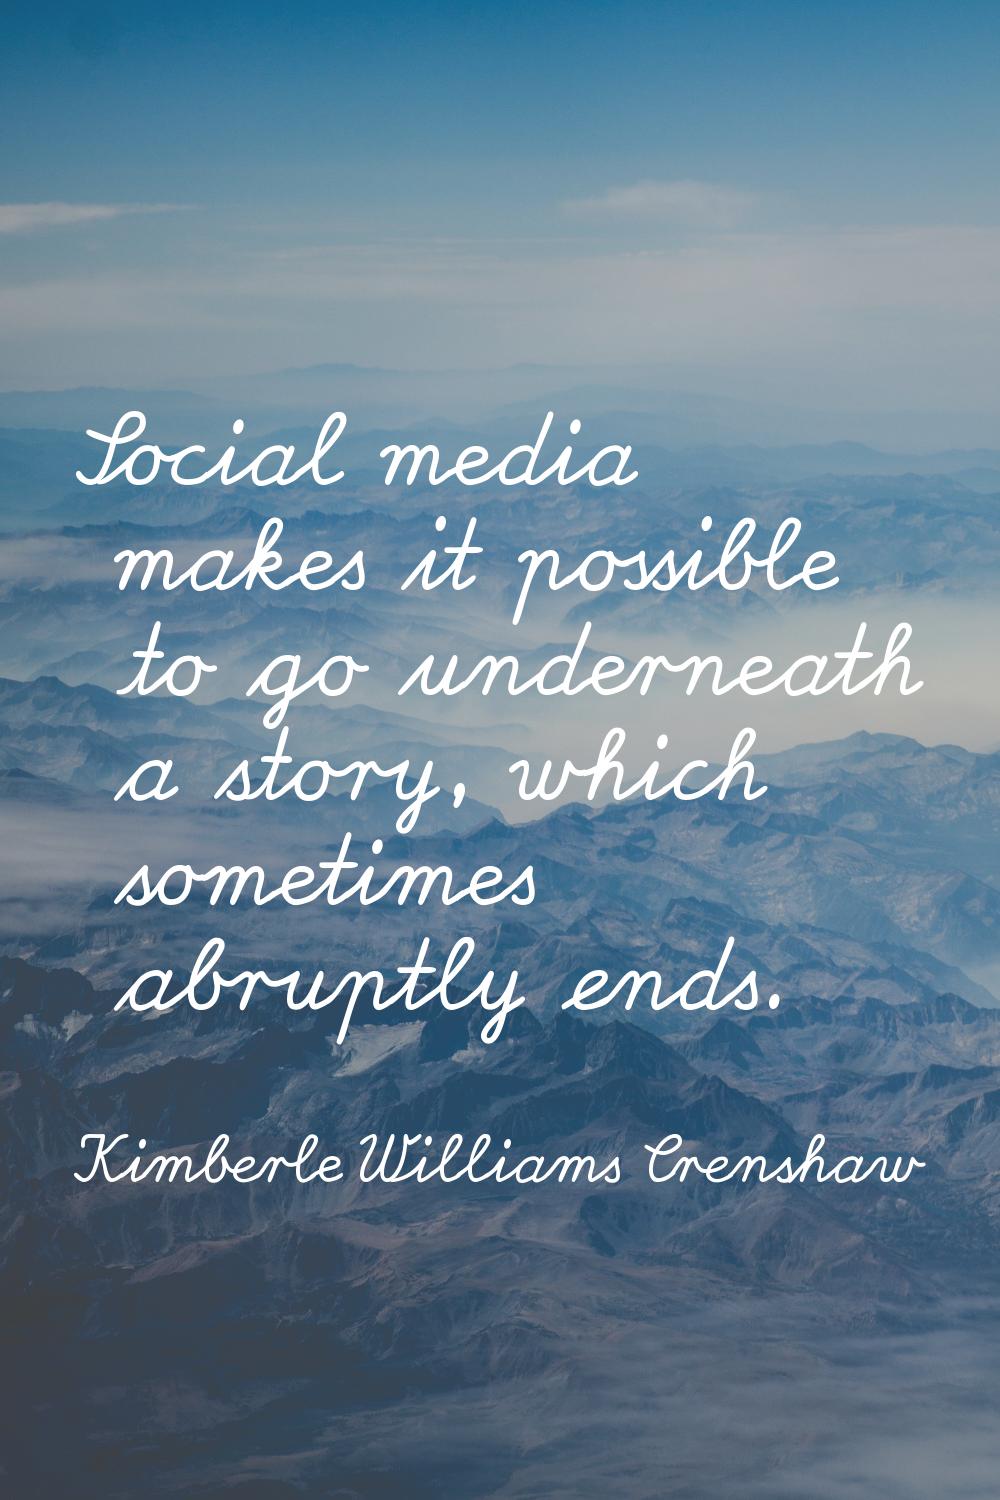 Social media makes it possible to go underneath a story, which sometimes abruptly ends.